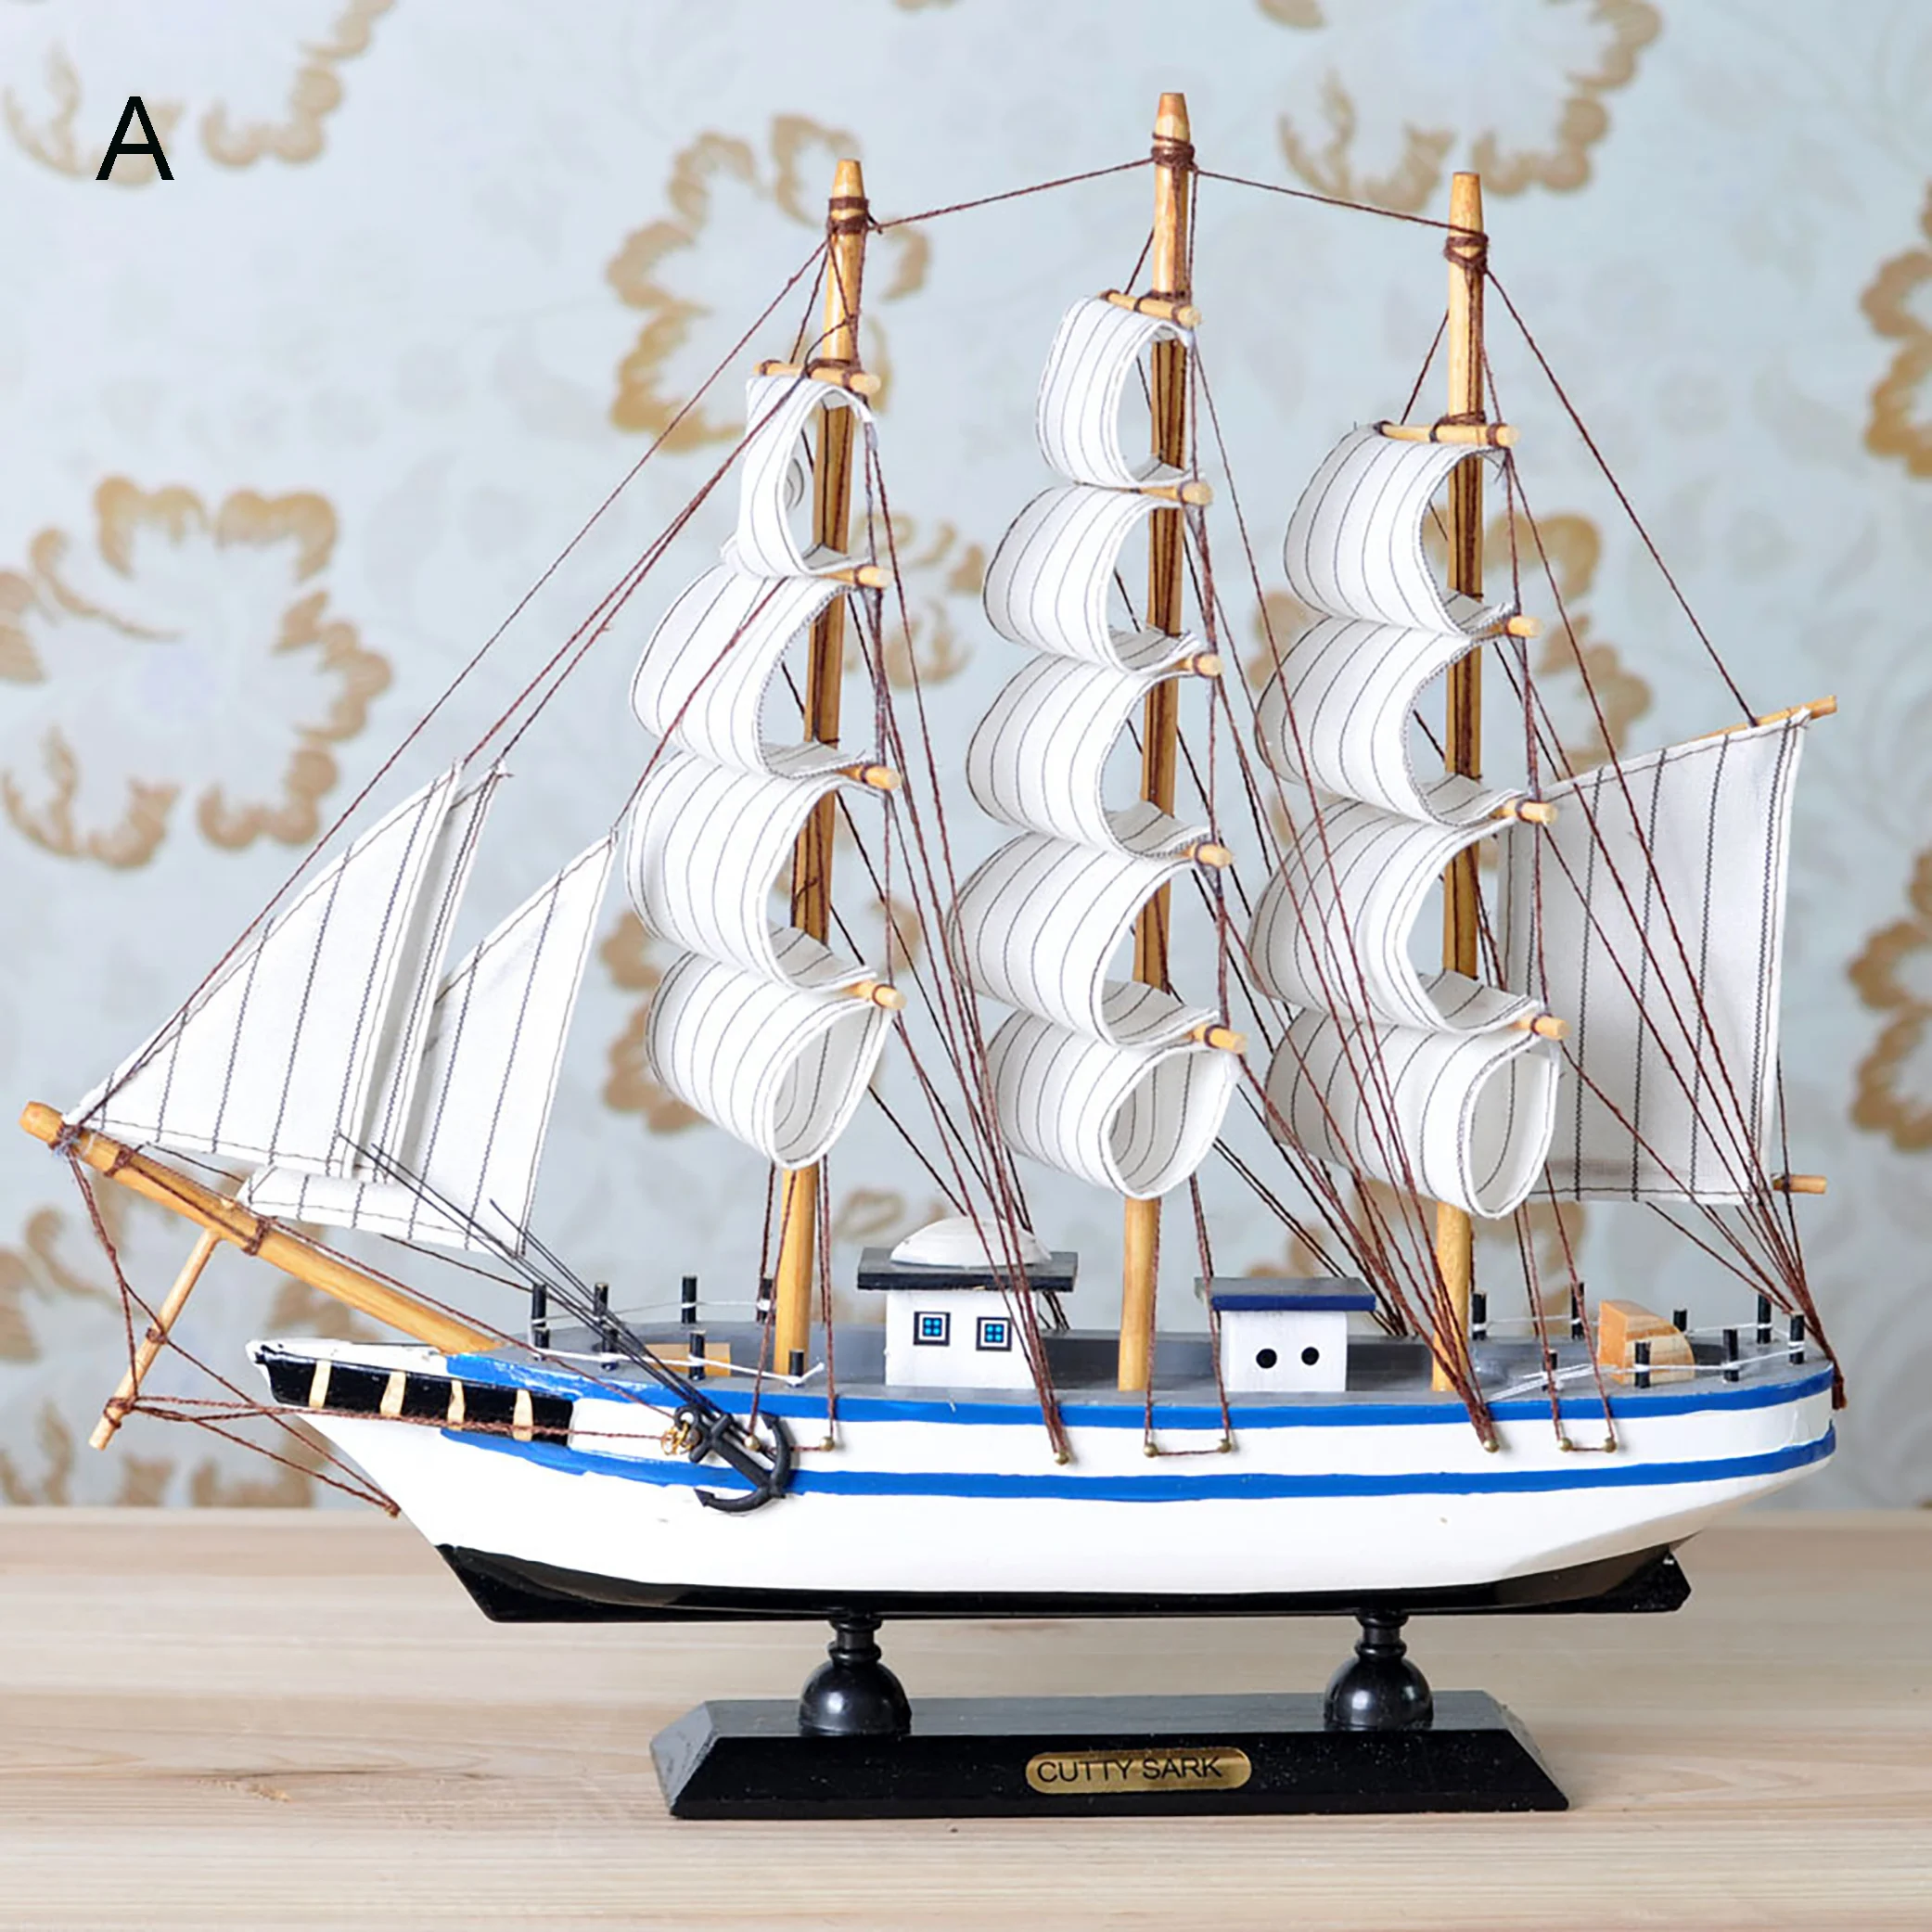 Deco 29cm 11.4" Hand-Crafted Wooden Sailboat Ship Model Miniature for Display 